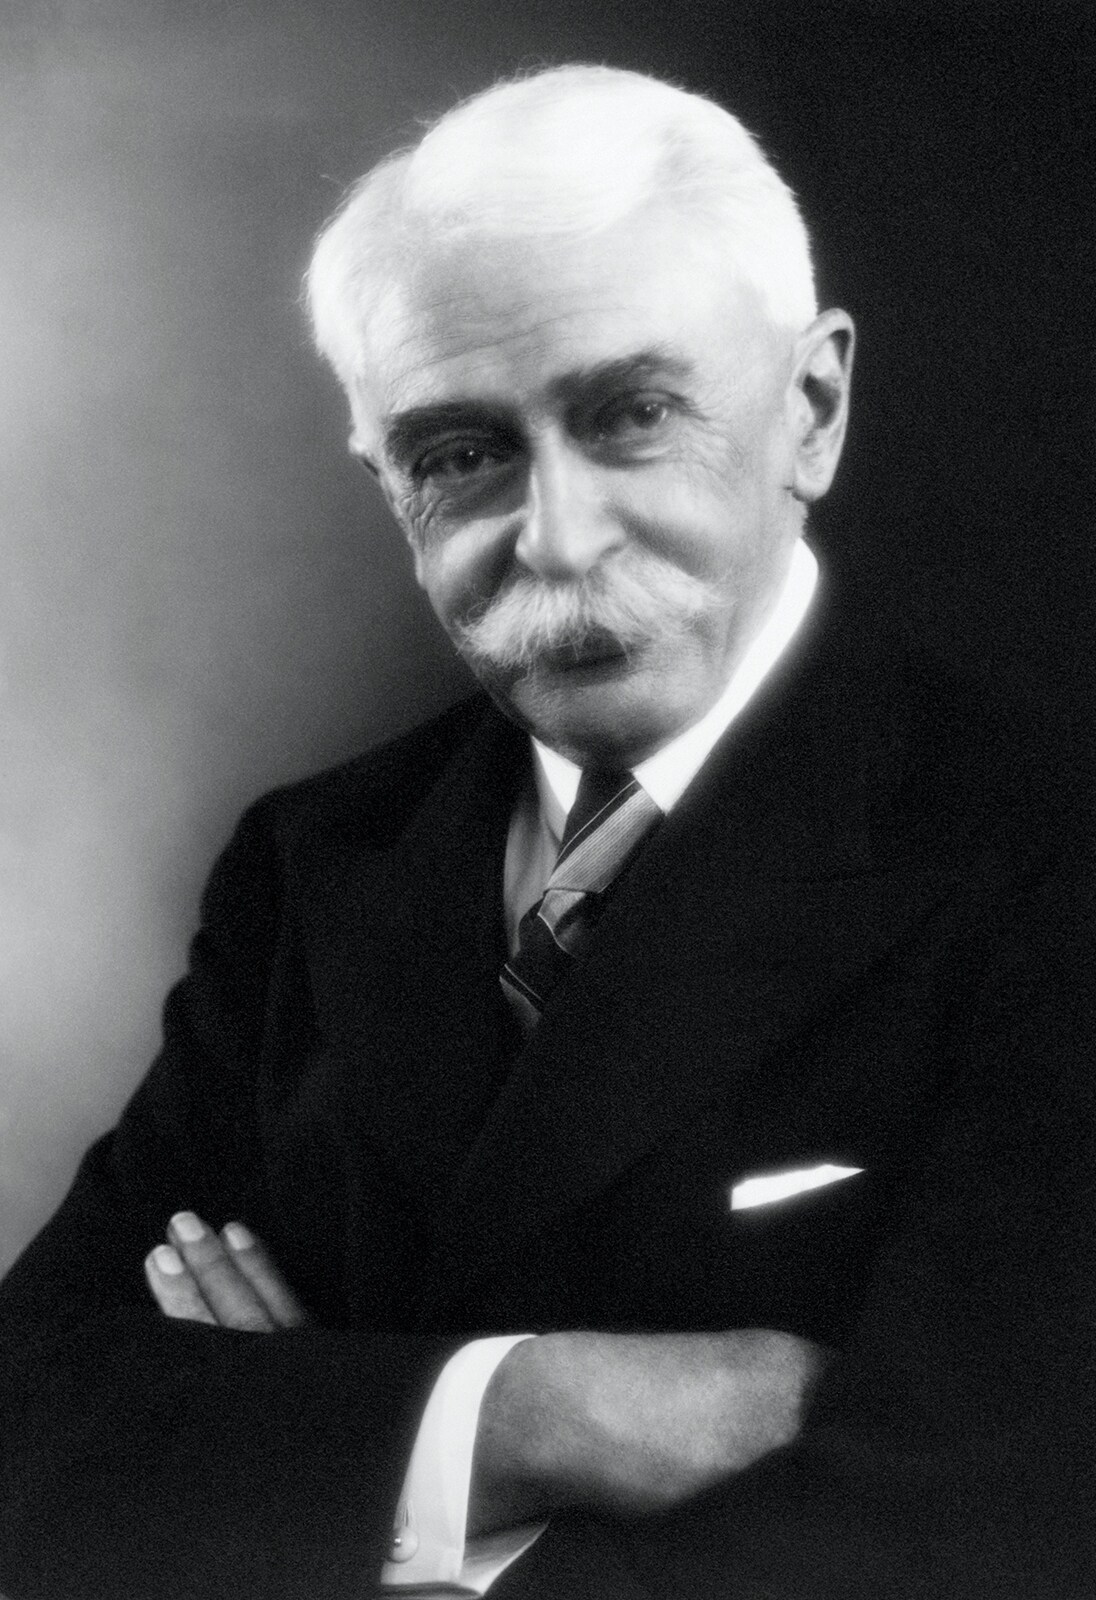 Former IOC members - Portrait of Pierre de COUBERTIN, IOC Member (FRA) from 1894 to 1896 and IOC President from 1896 to 1925.